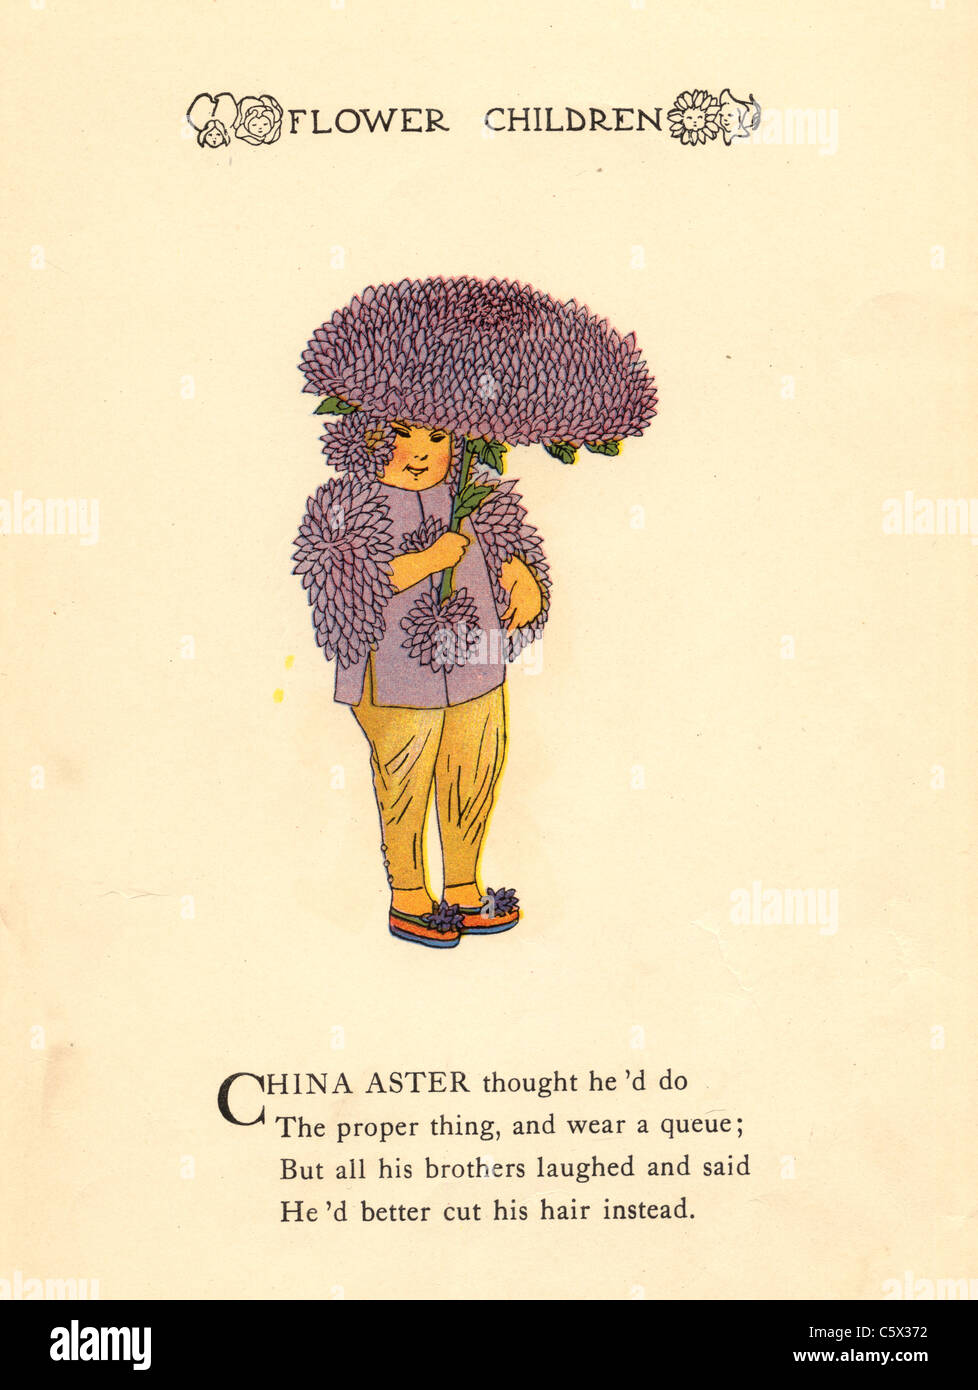 China Aster - Flower Child Illustration from an antiquarian book Stock Photo